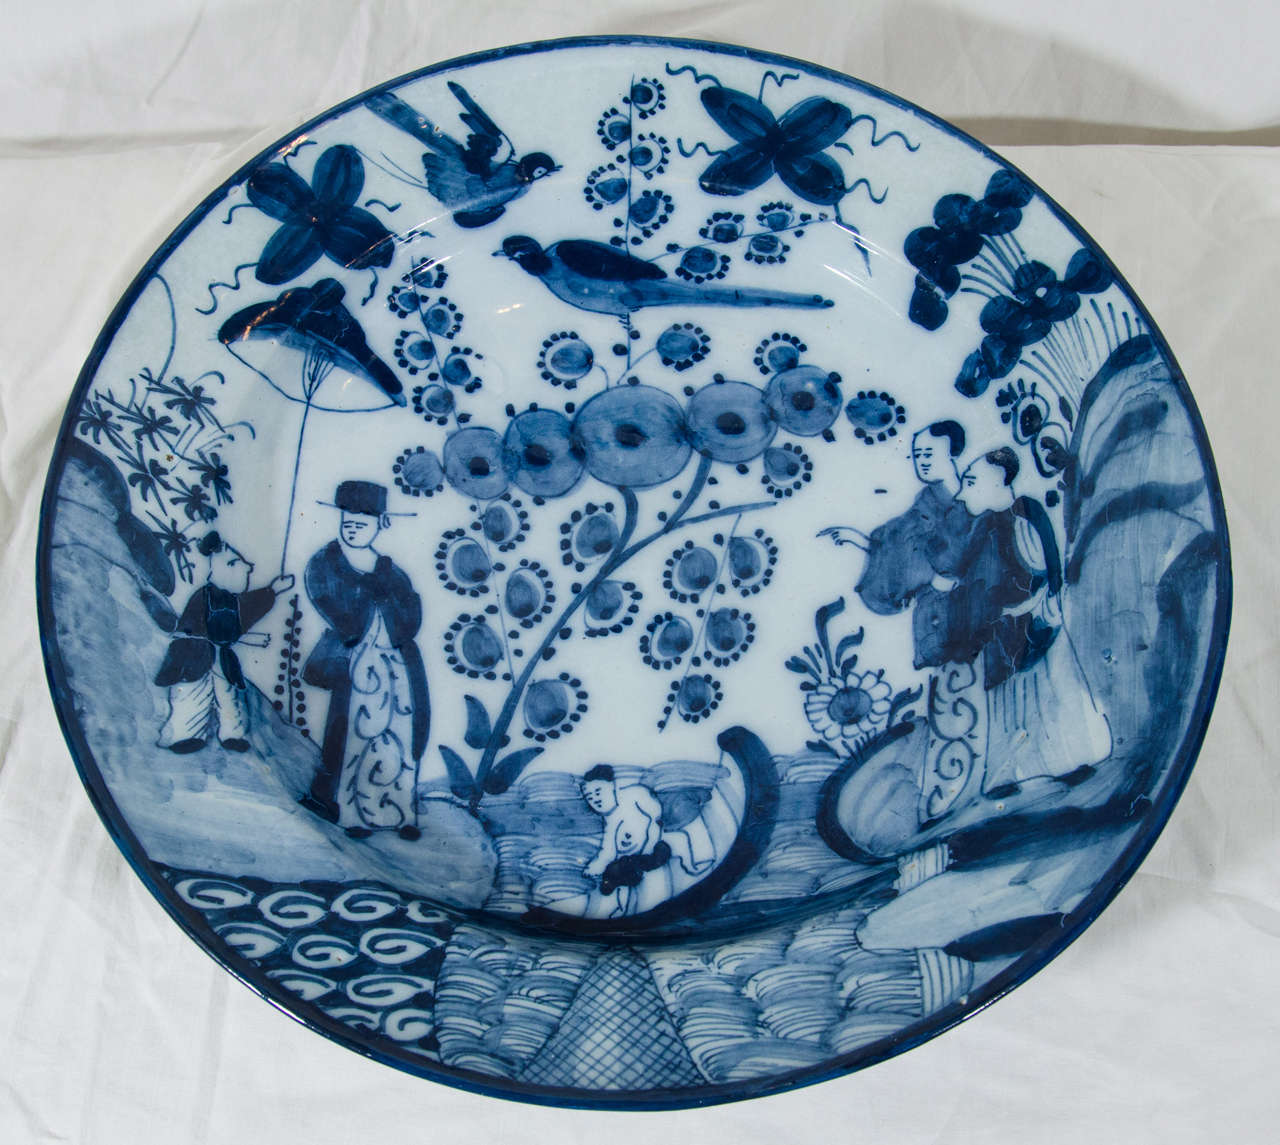 A pair of 18th Century Dutch Delft blue and white chargers hand-painted in a distinctive design with figures covering the entire dish. This borderless design is quite rare. The back of the plate marked 